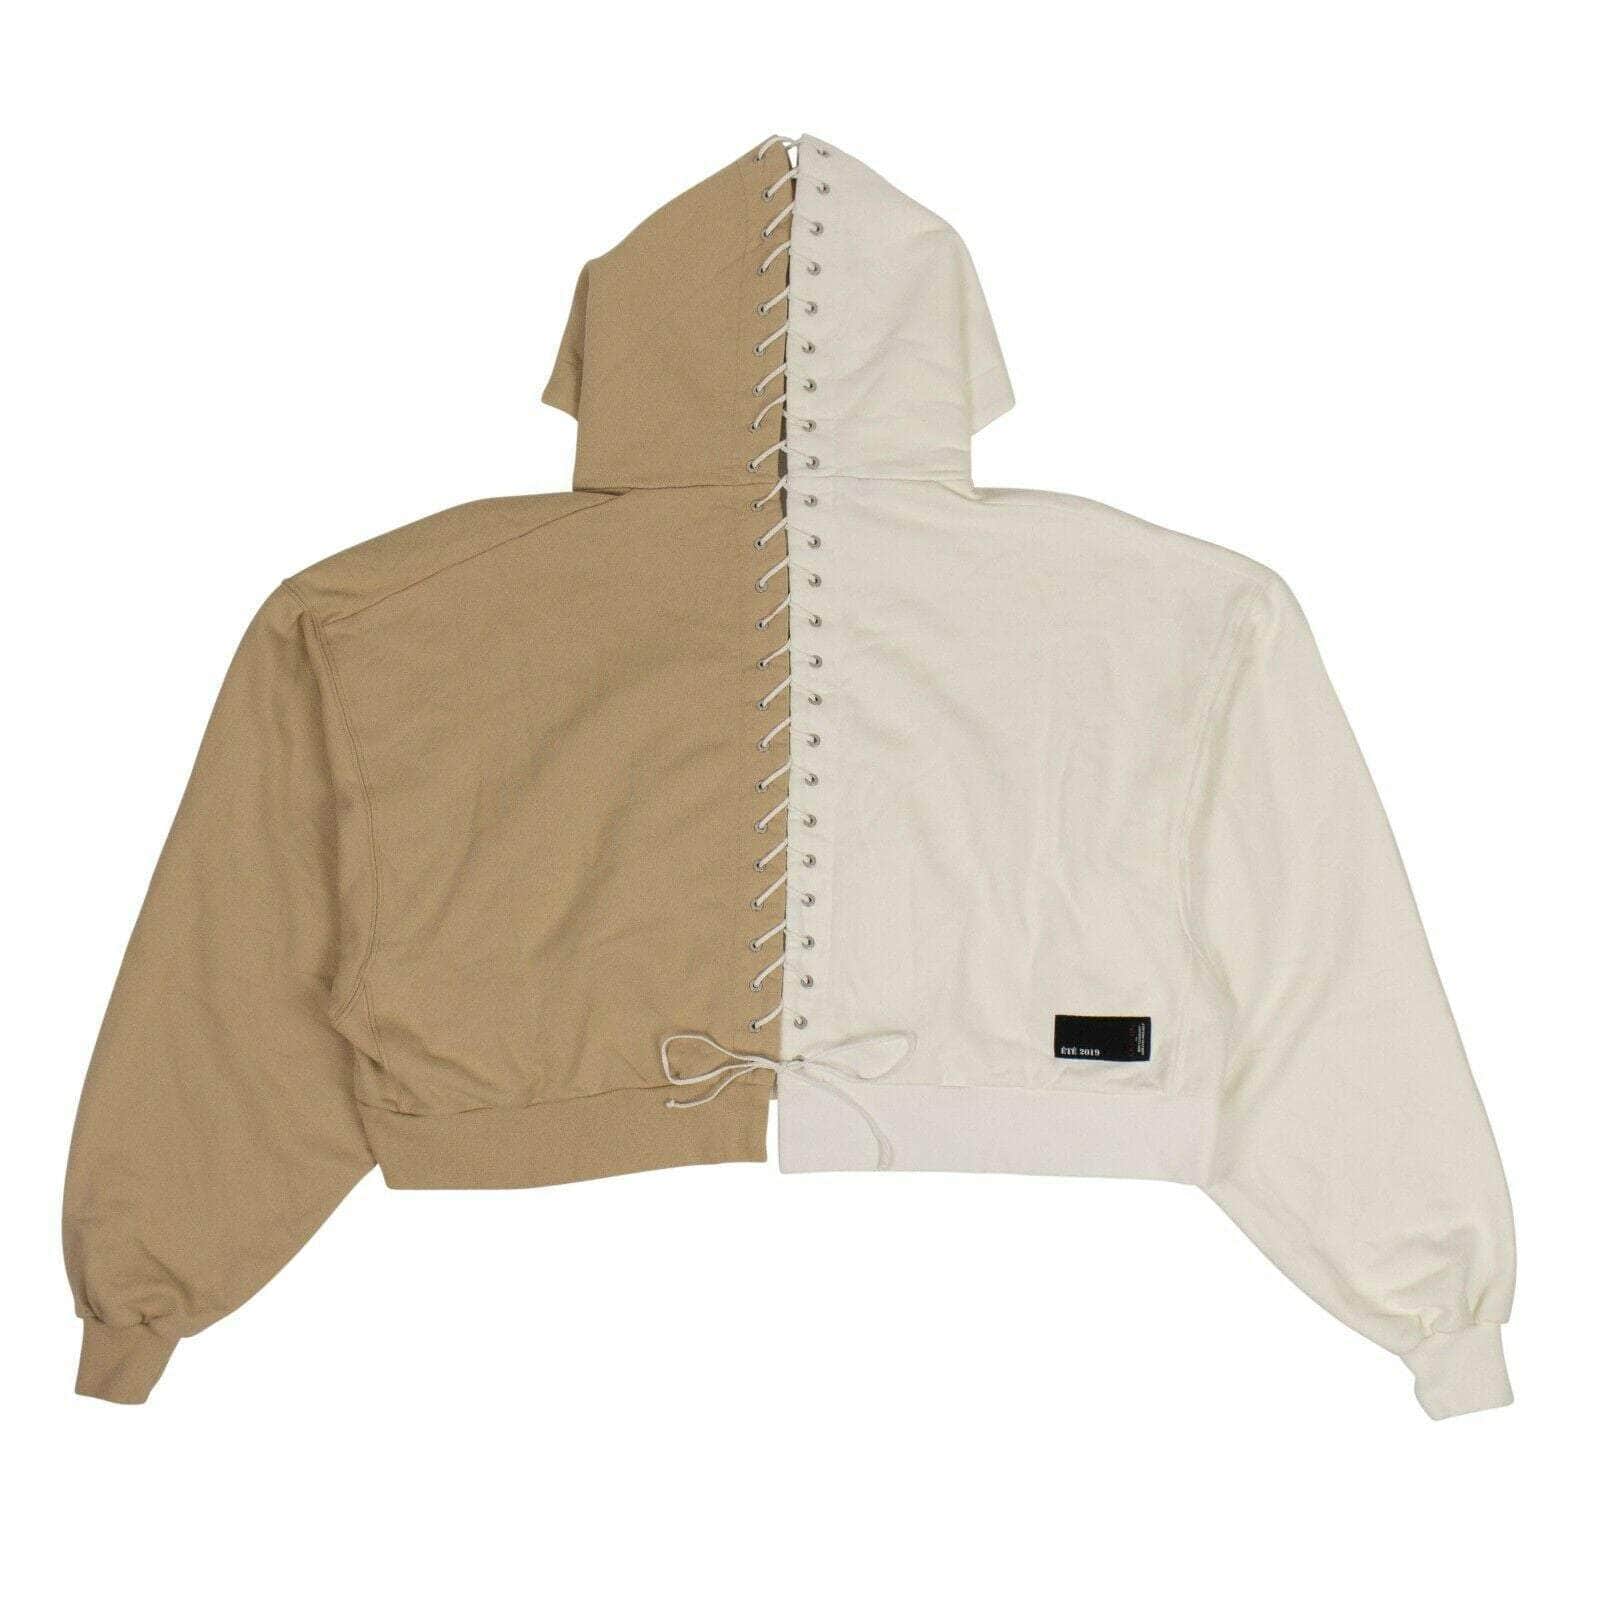 Lace-Up Hoodie Sweatshirt - Beige And White - GBNY